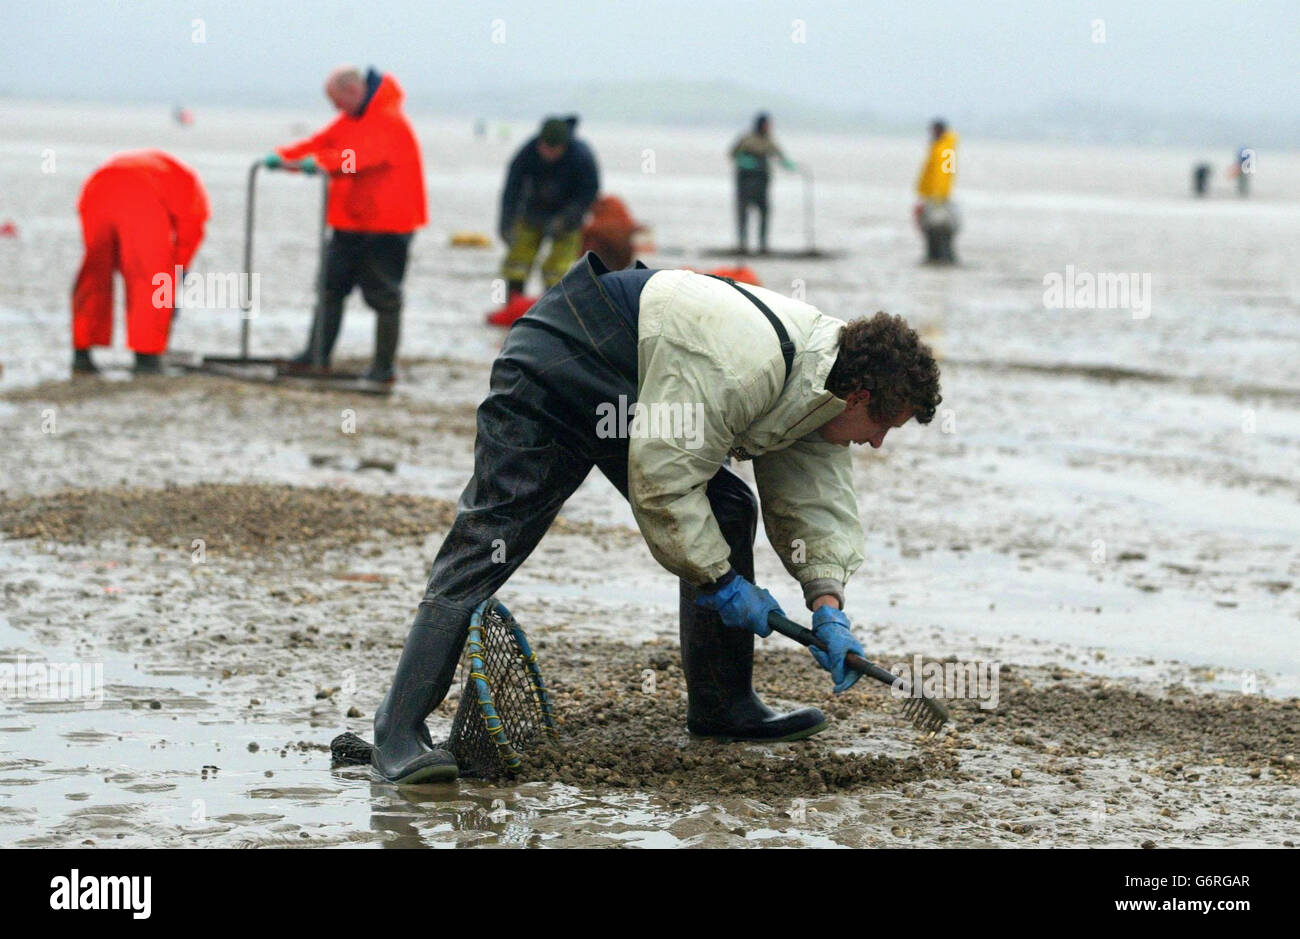 Cocklers back at work on the sands of Morcambe Bay , Lancashire, after the tragic event where 17 men and two women, died while harvesting cockles. China said it would work with the British government to thwart illegal immigration and people-smuggling following the deaths of the 19 Chinese cockle pickers in Morecambe Bay. Stock Photo